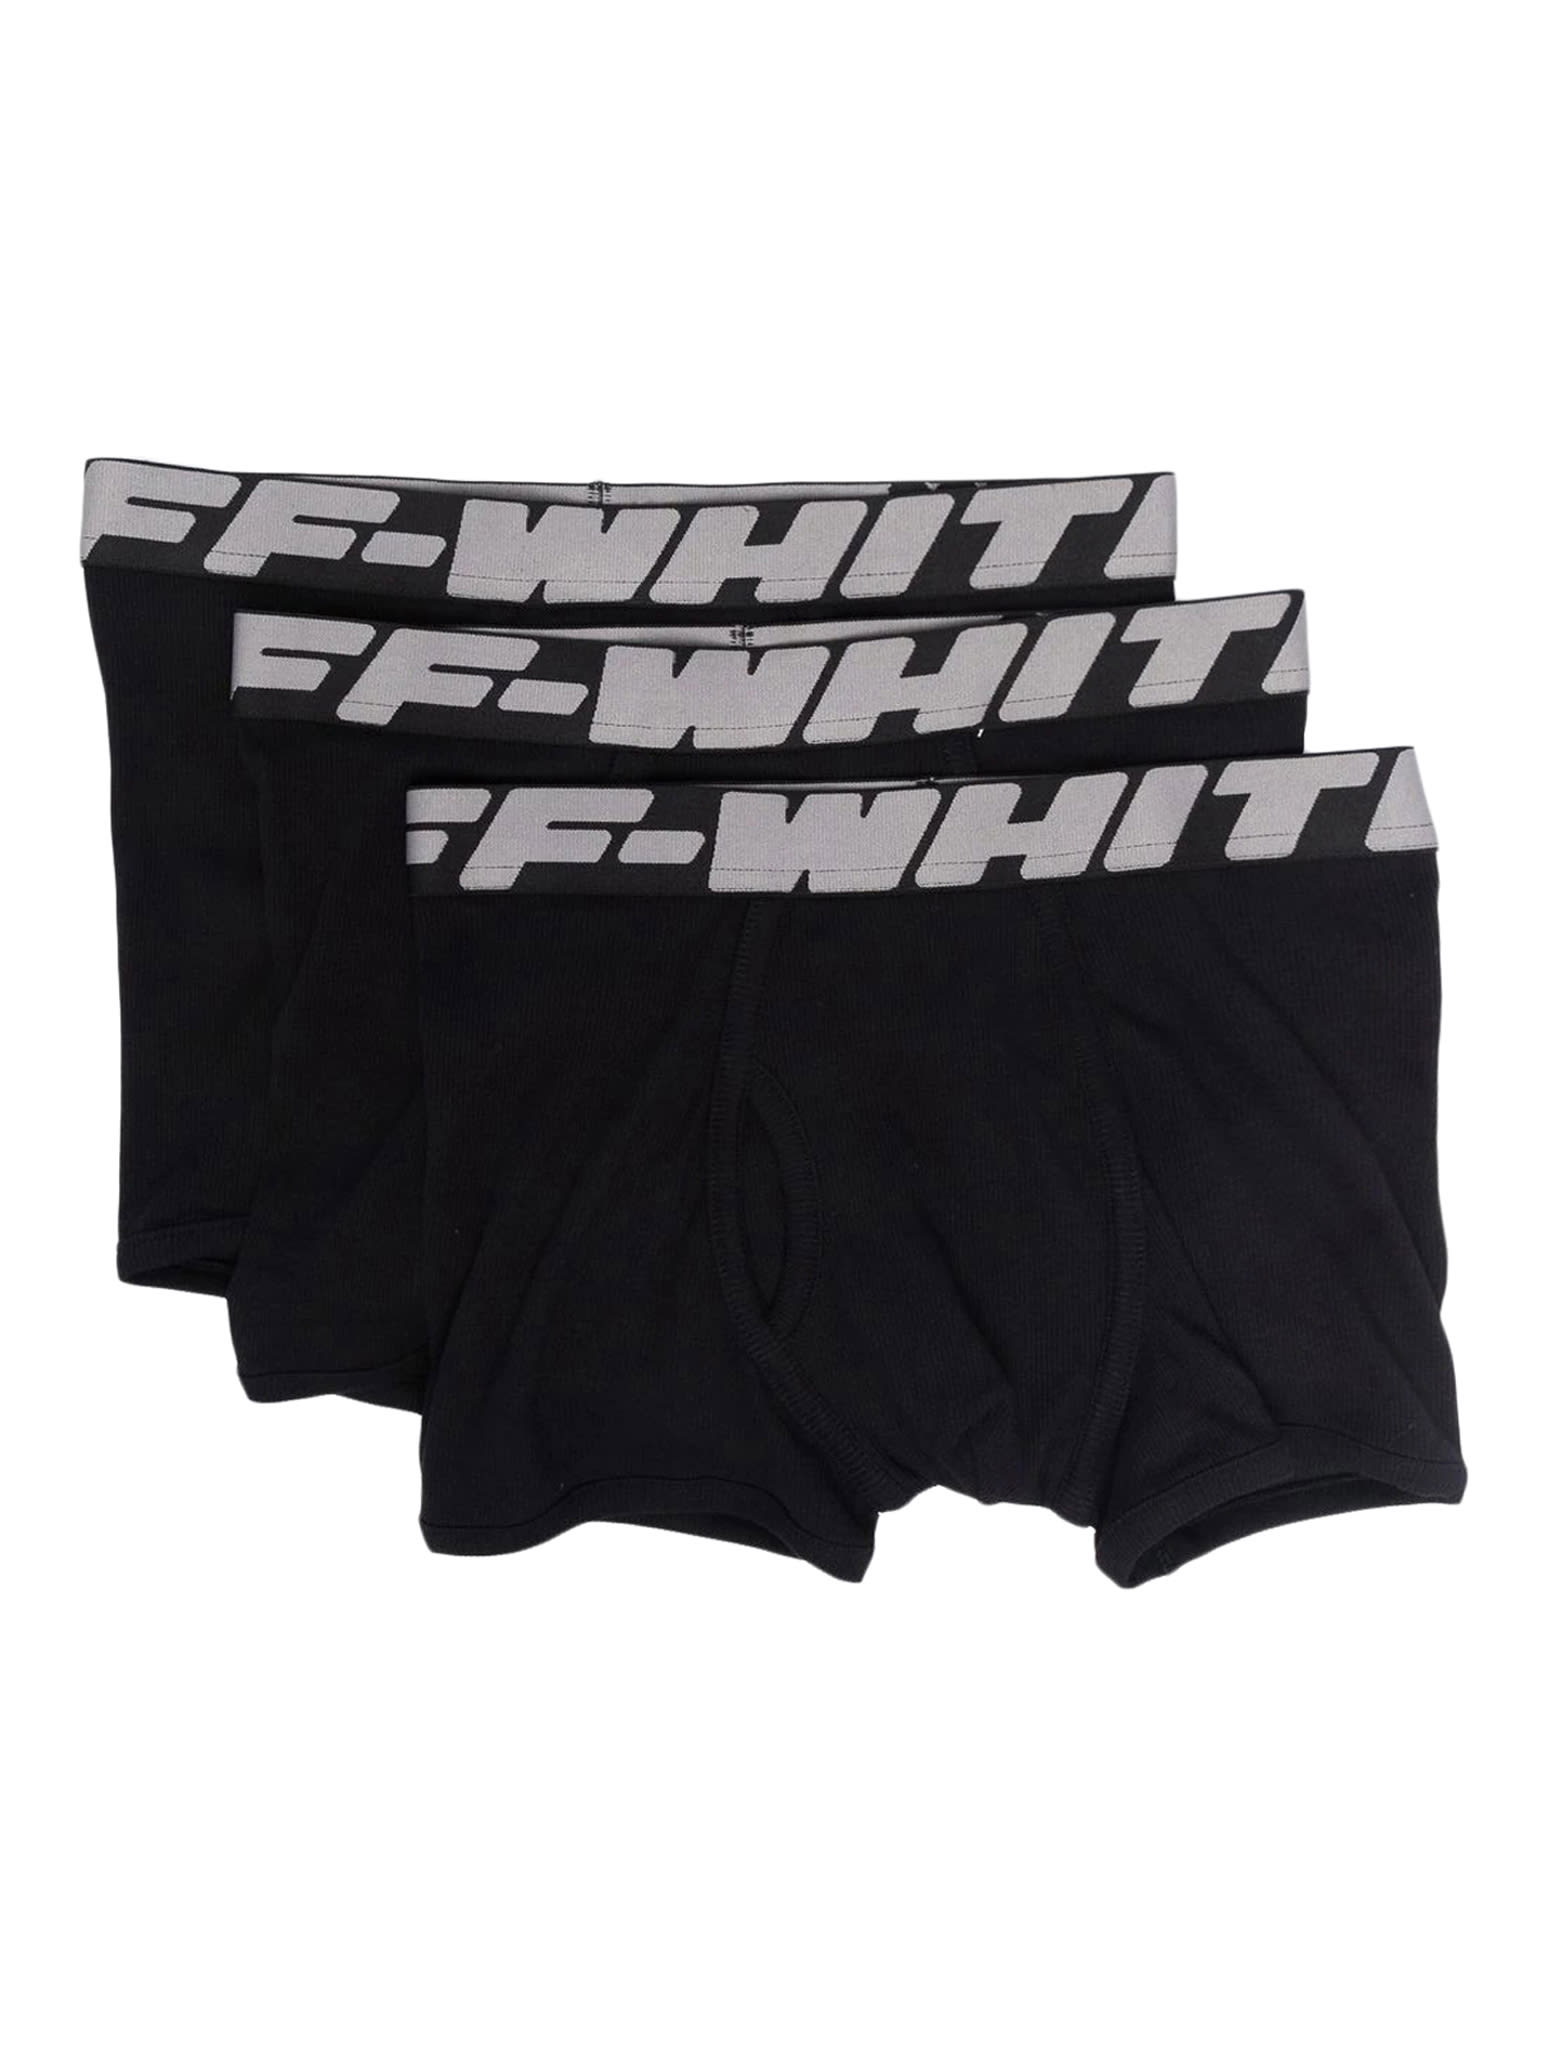 OFF-WHITE INDUST TRIPACK BOXER